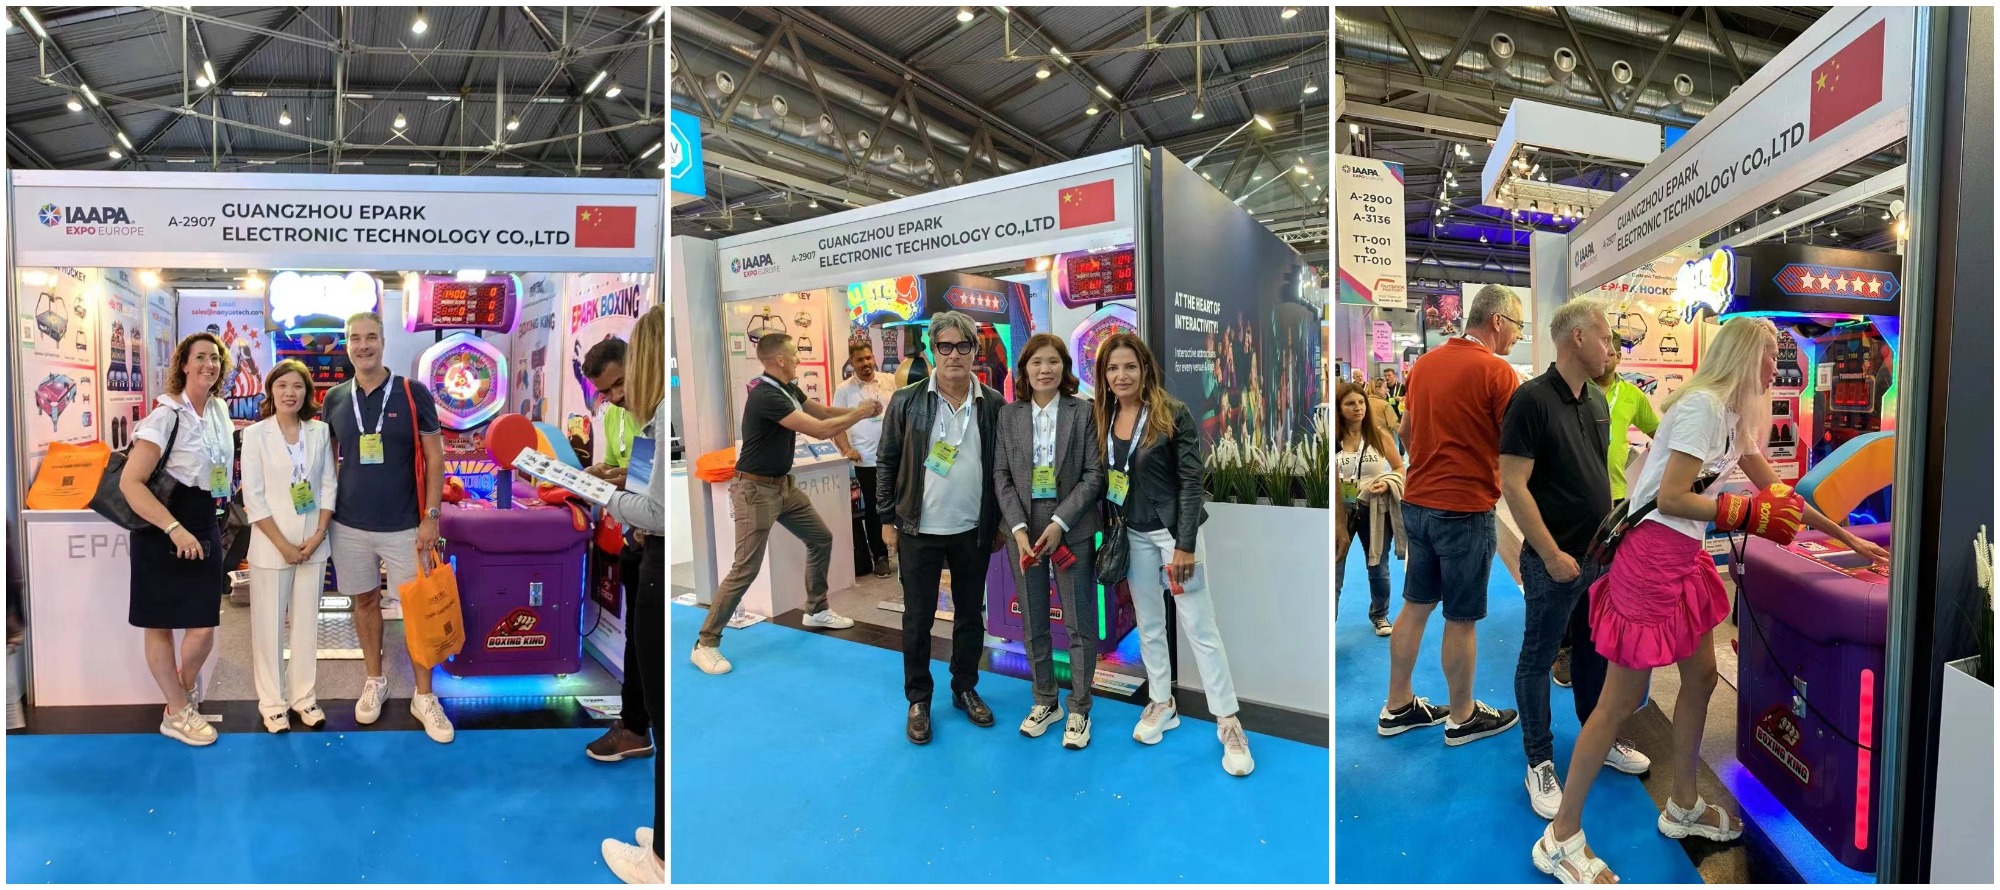 Welcome To Visit IAAPA EPARK Show in Austria